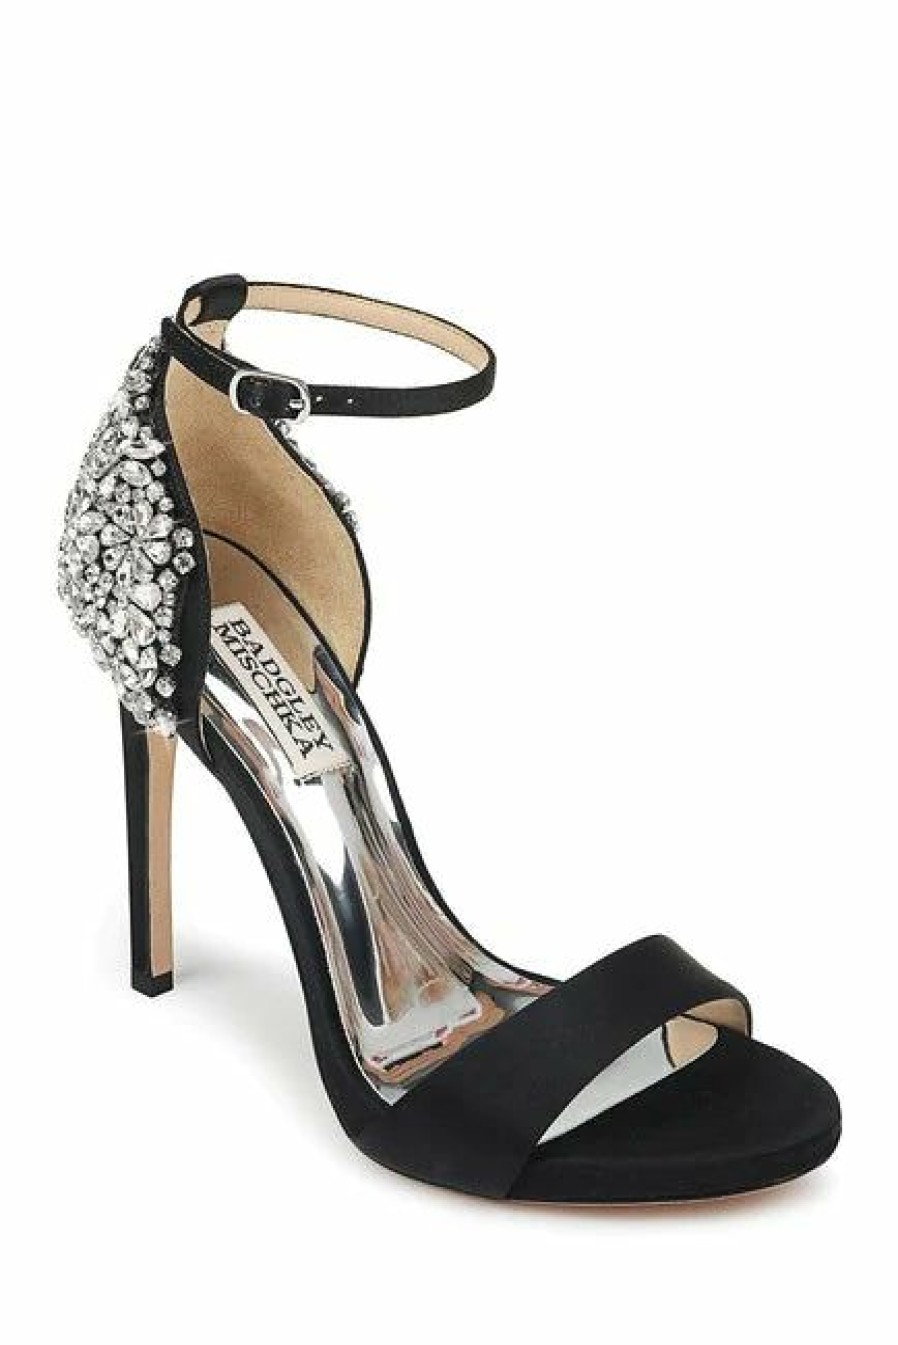 Shoes High Heel Hierarchy Hot Women Online Sale · Bagsshoeswear